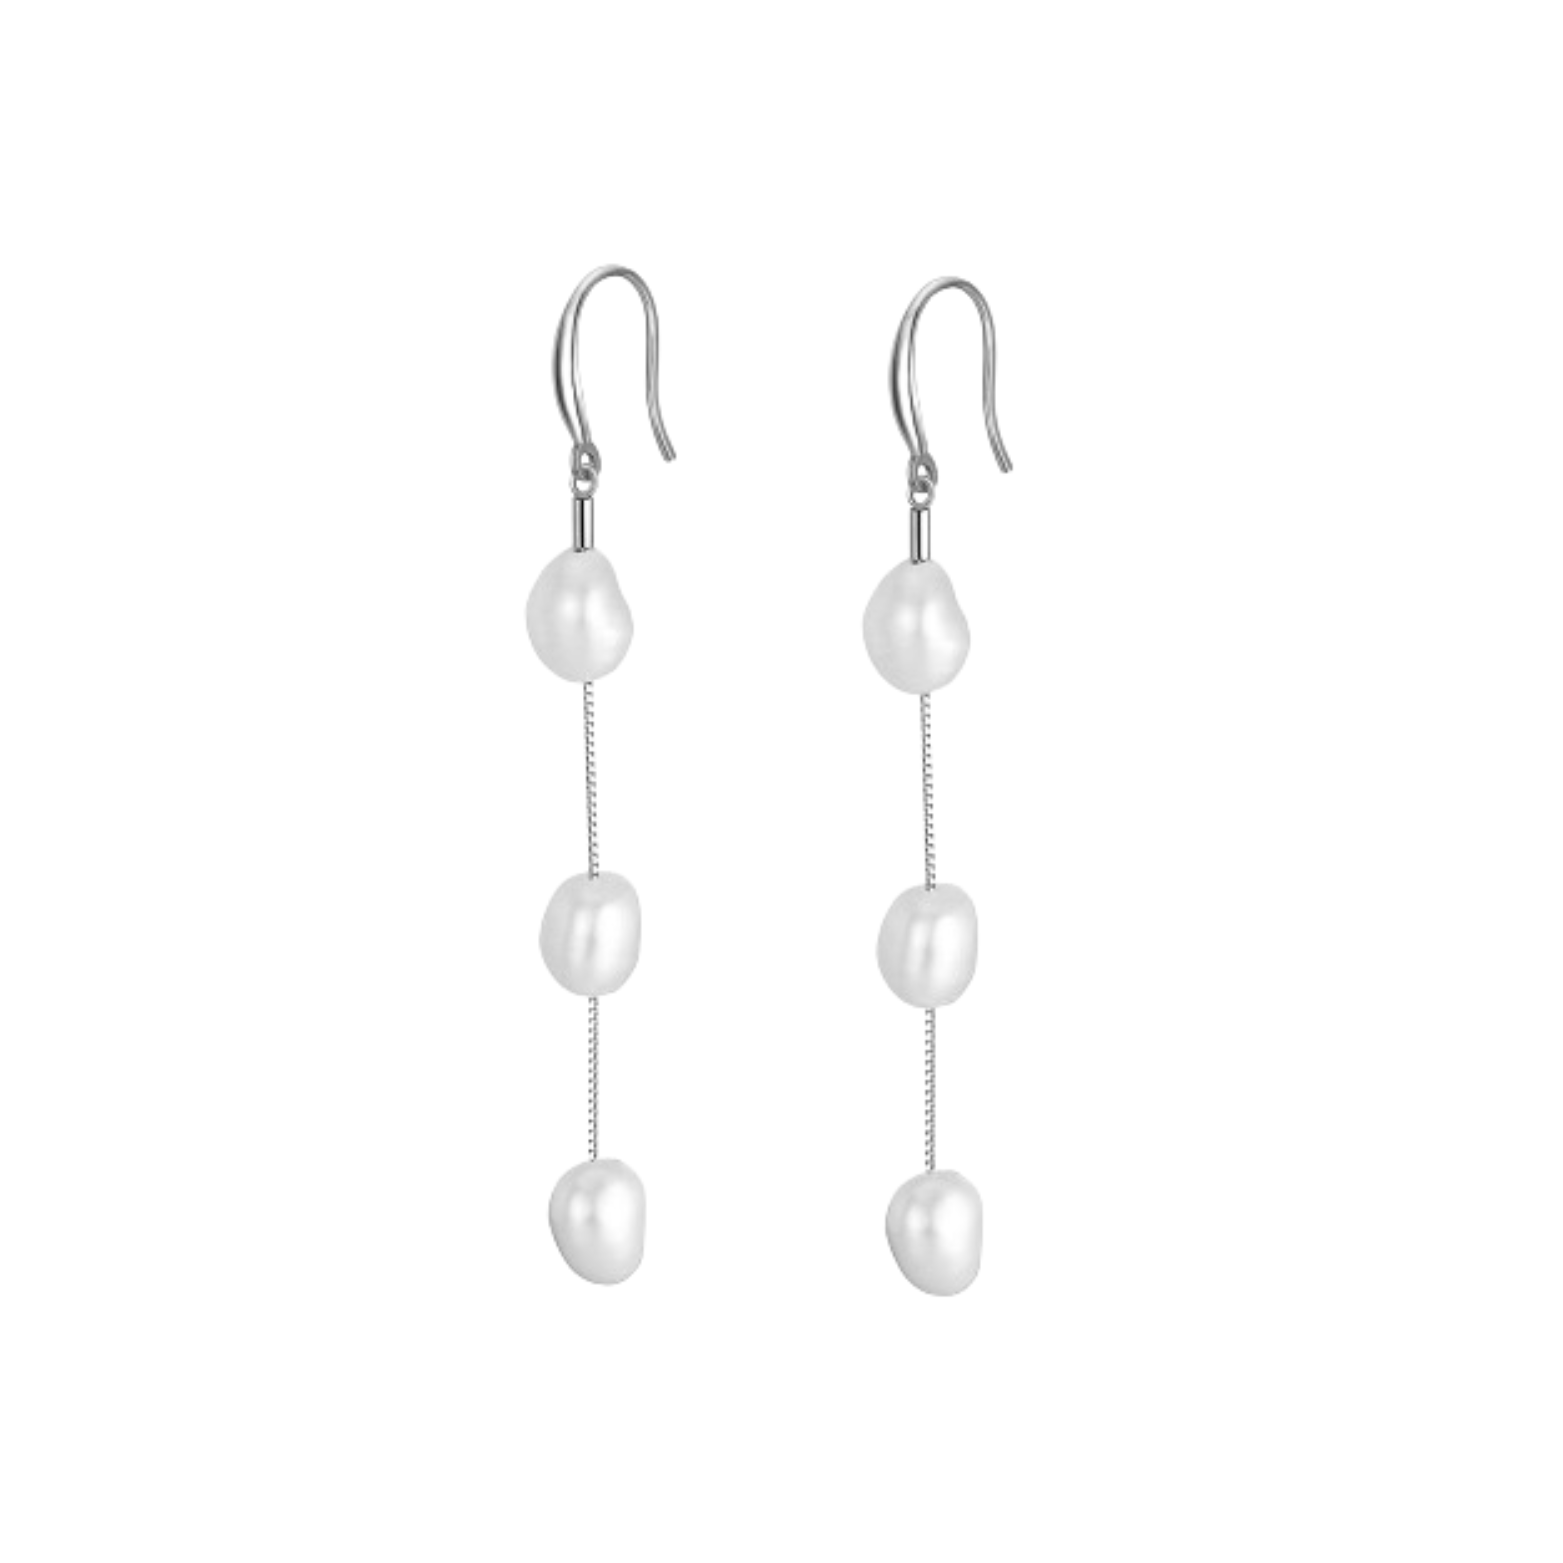 Close-up view of Ivory Pearl Earrings with Sterling Silver hooks